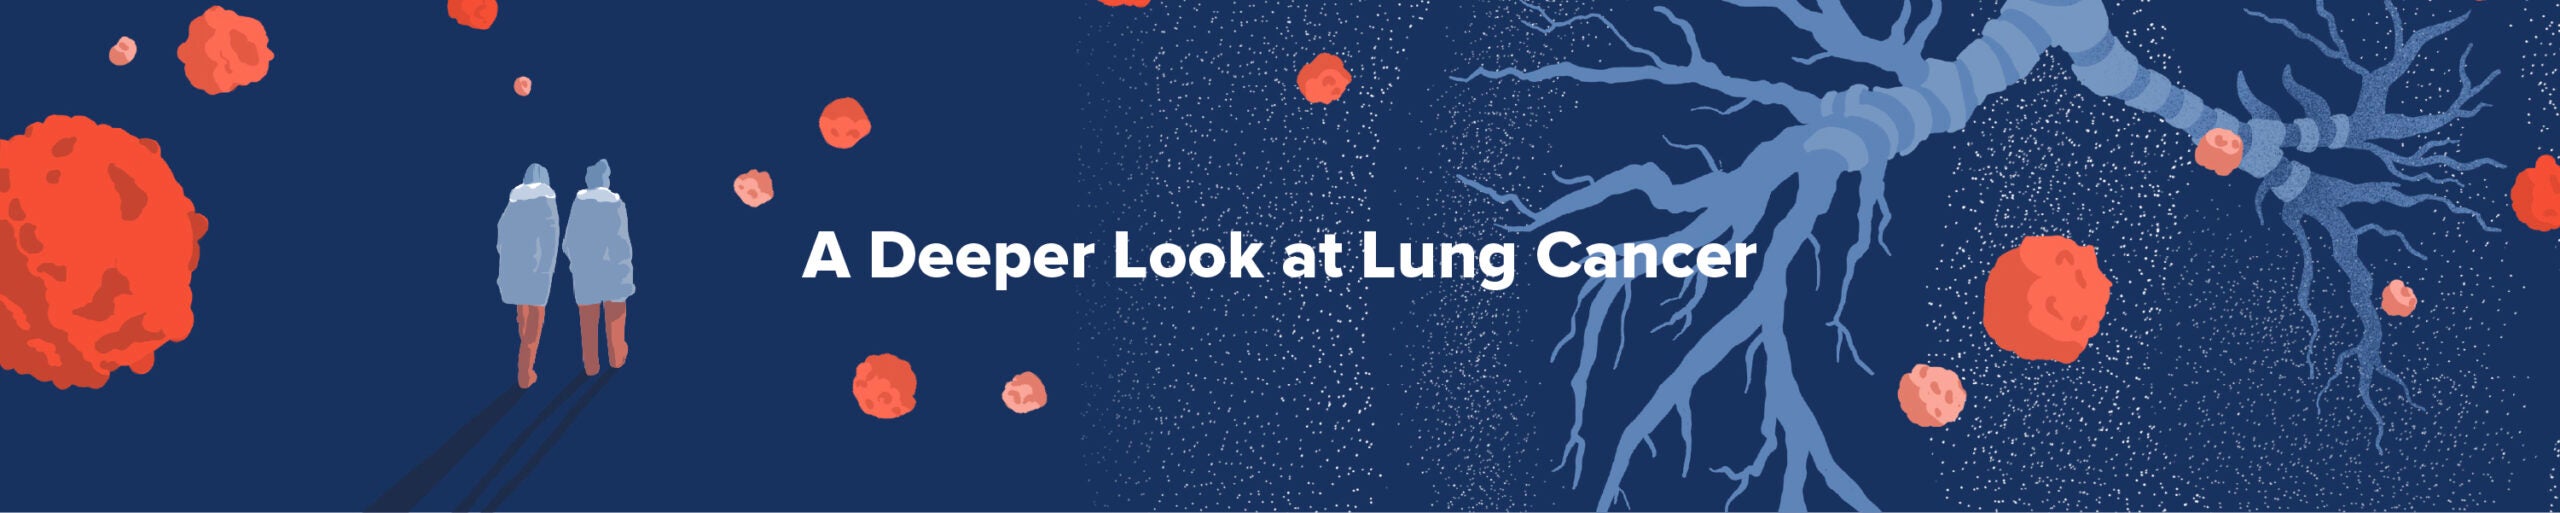 A Deeper Look at Lung Cancer